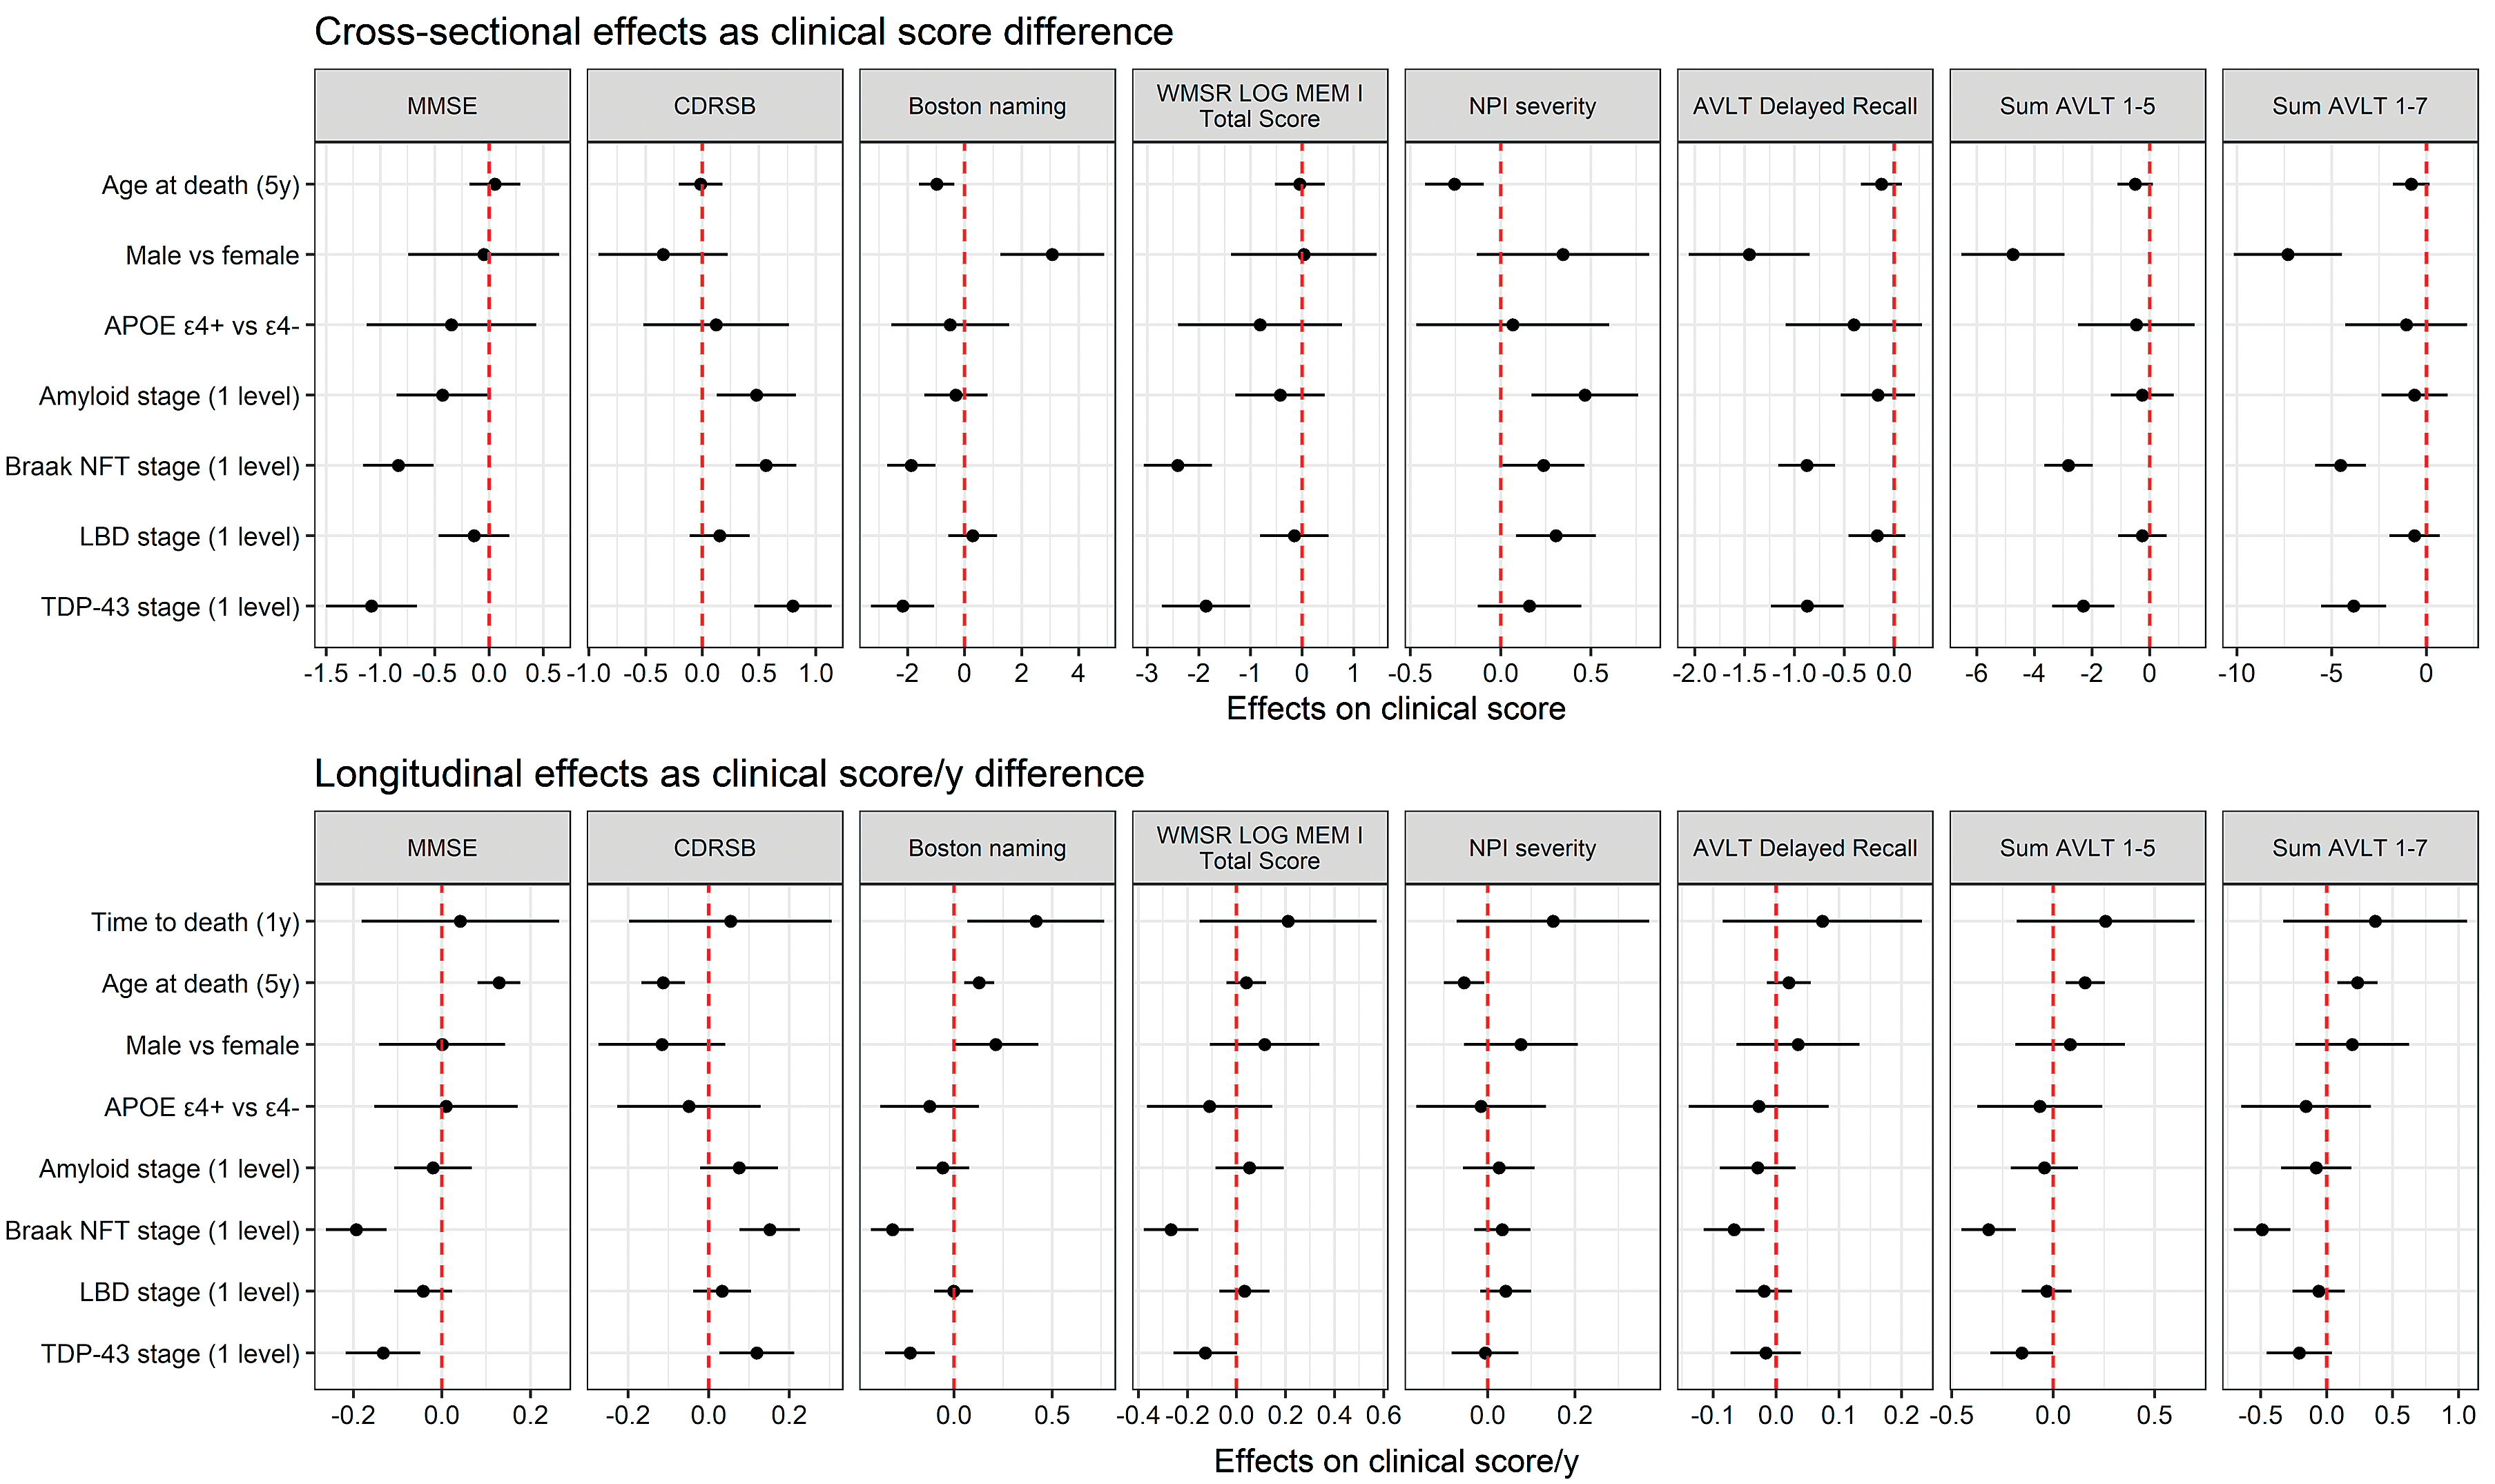 Forest plot showing estimates and 95% confidence intervals for cross-sectional and longitudinal models Forest plots that do not cross red dotted line represent statistically significant associations (p < 0.05). In our model, age at death was centered at 80 years old with 5 years per unit increase, and time to death was centered at 5 years before death with one year per unit increase.